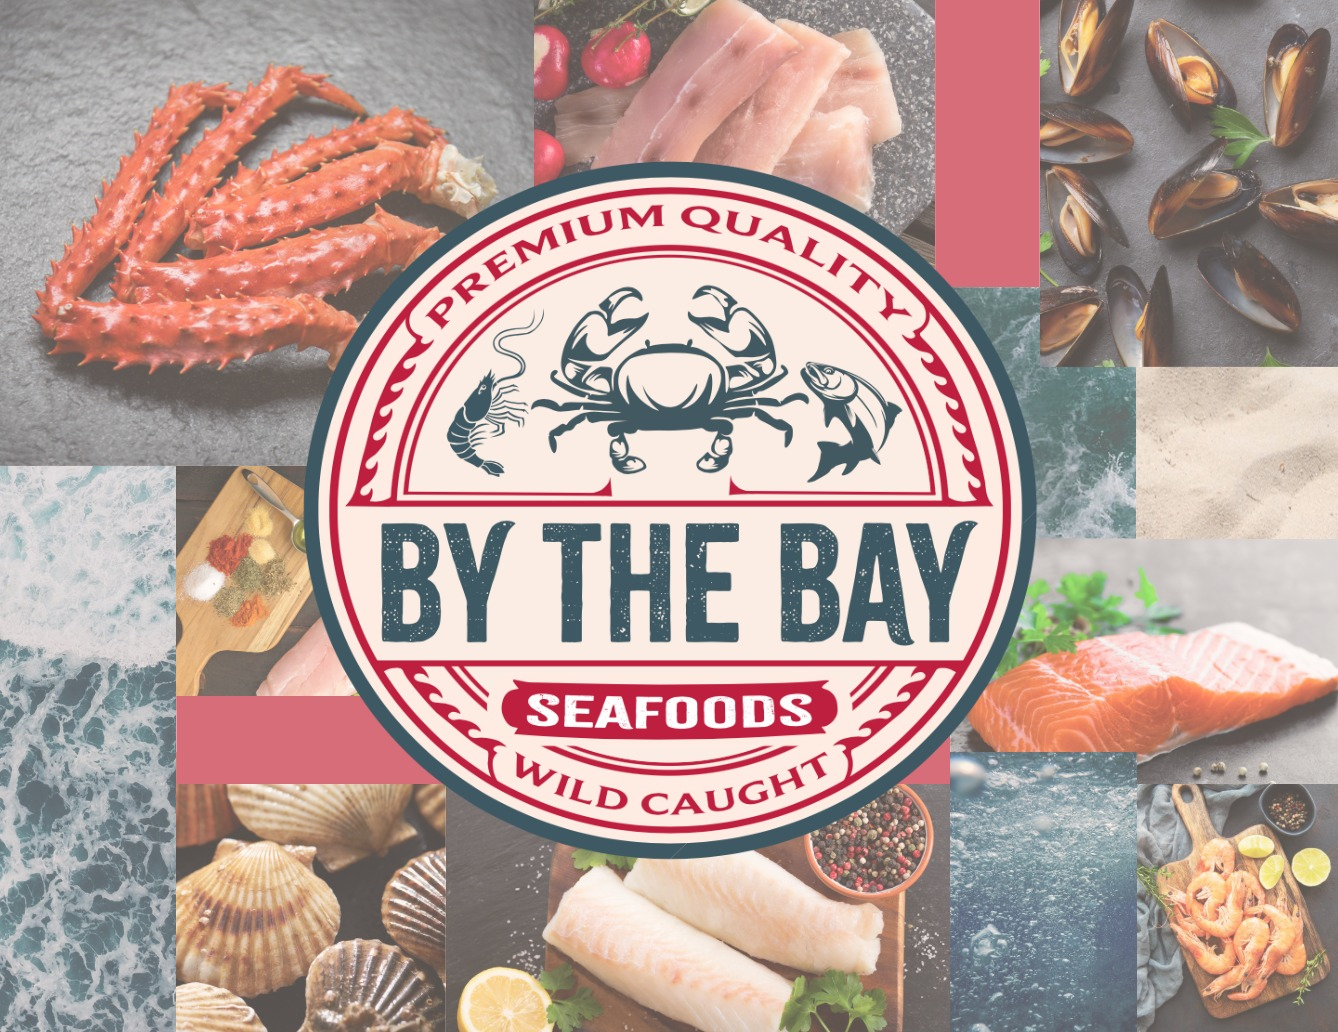 By The Bay Seafoods